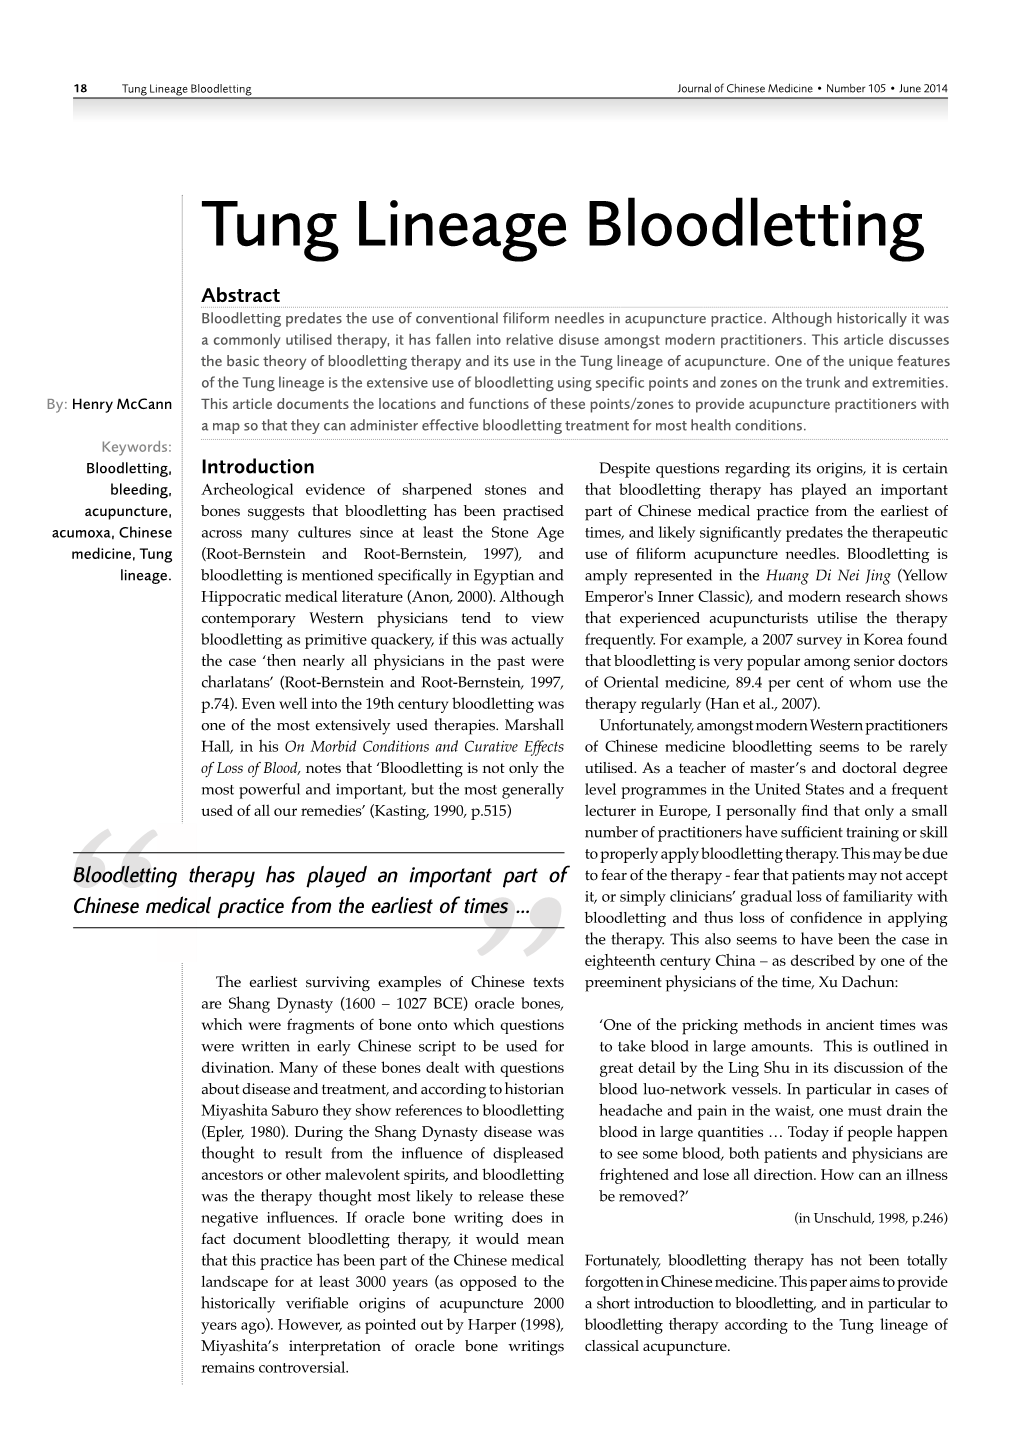 Tung Lineage Bloodletting